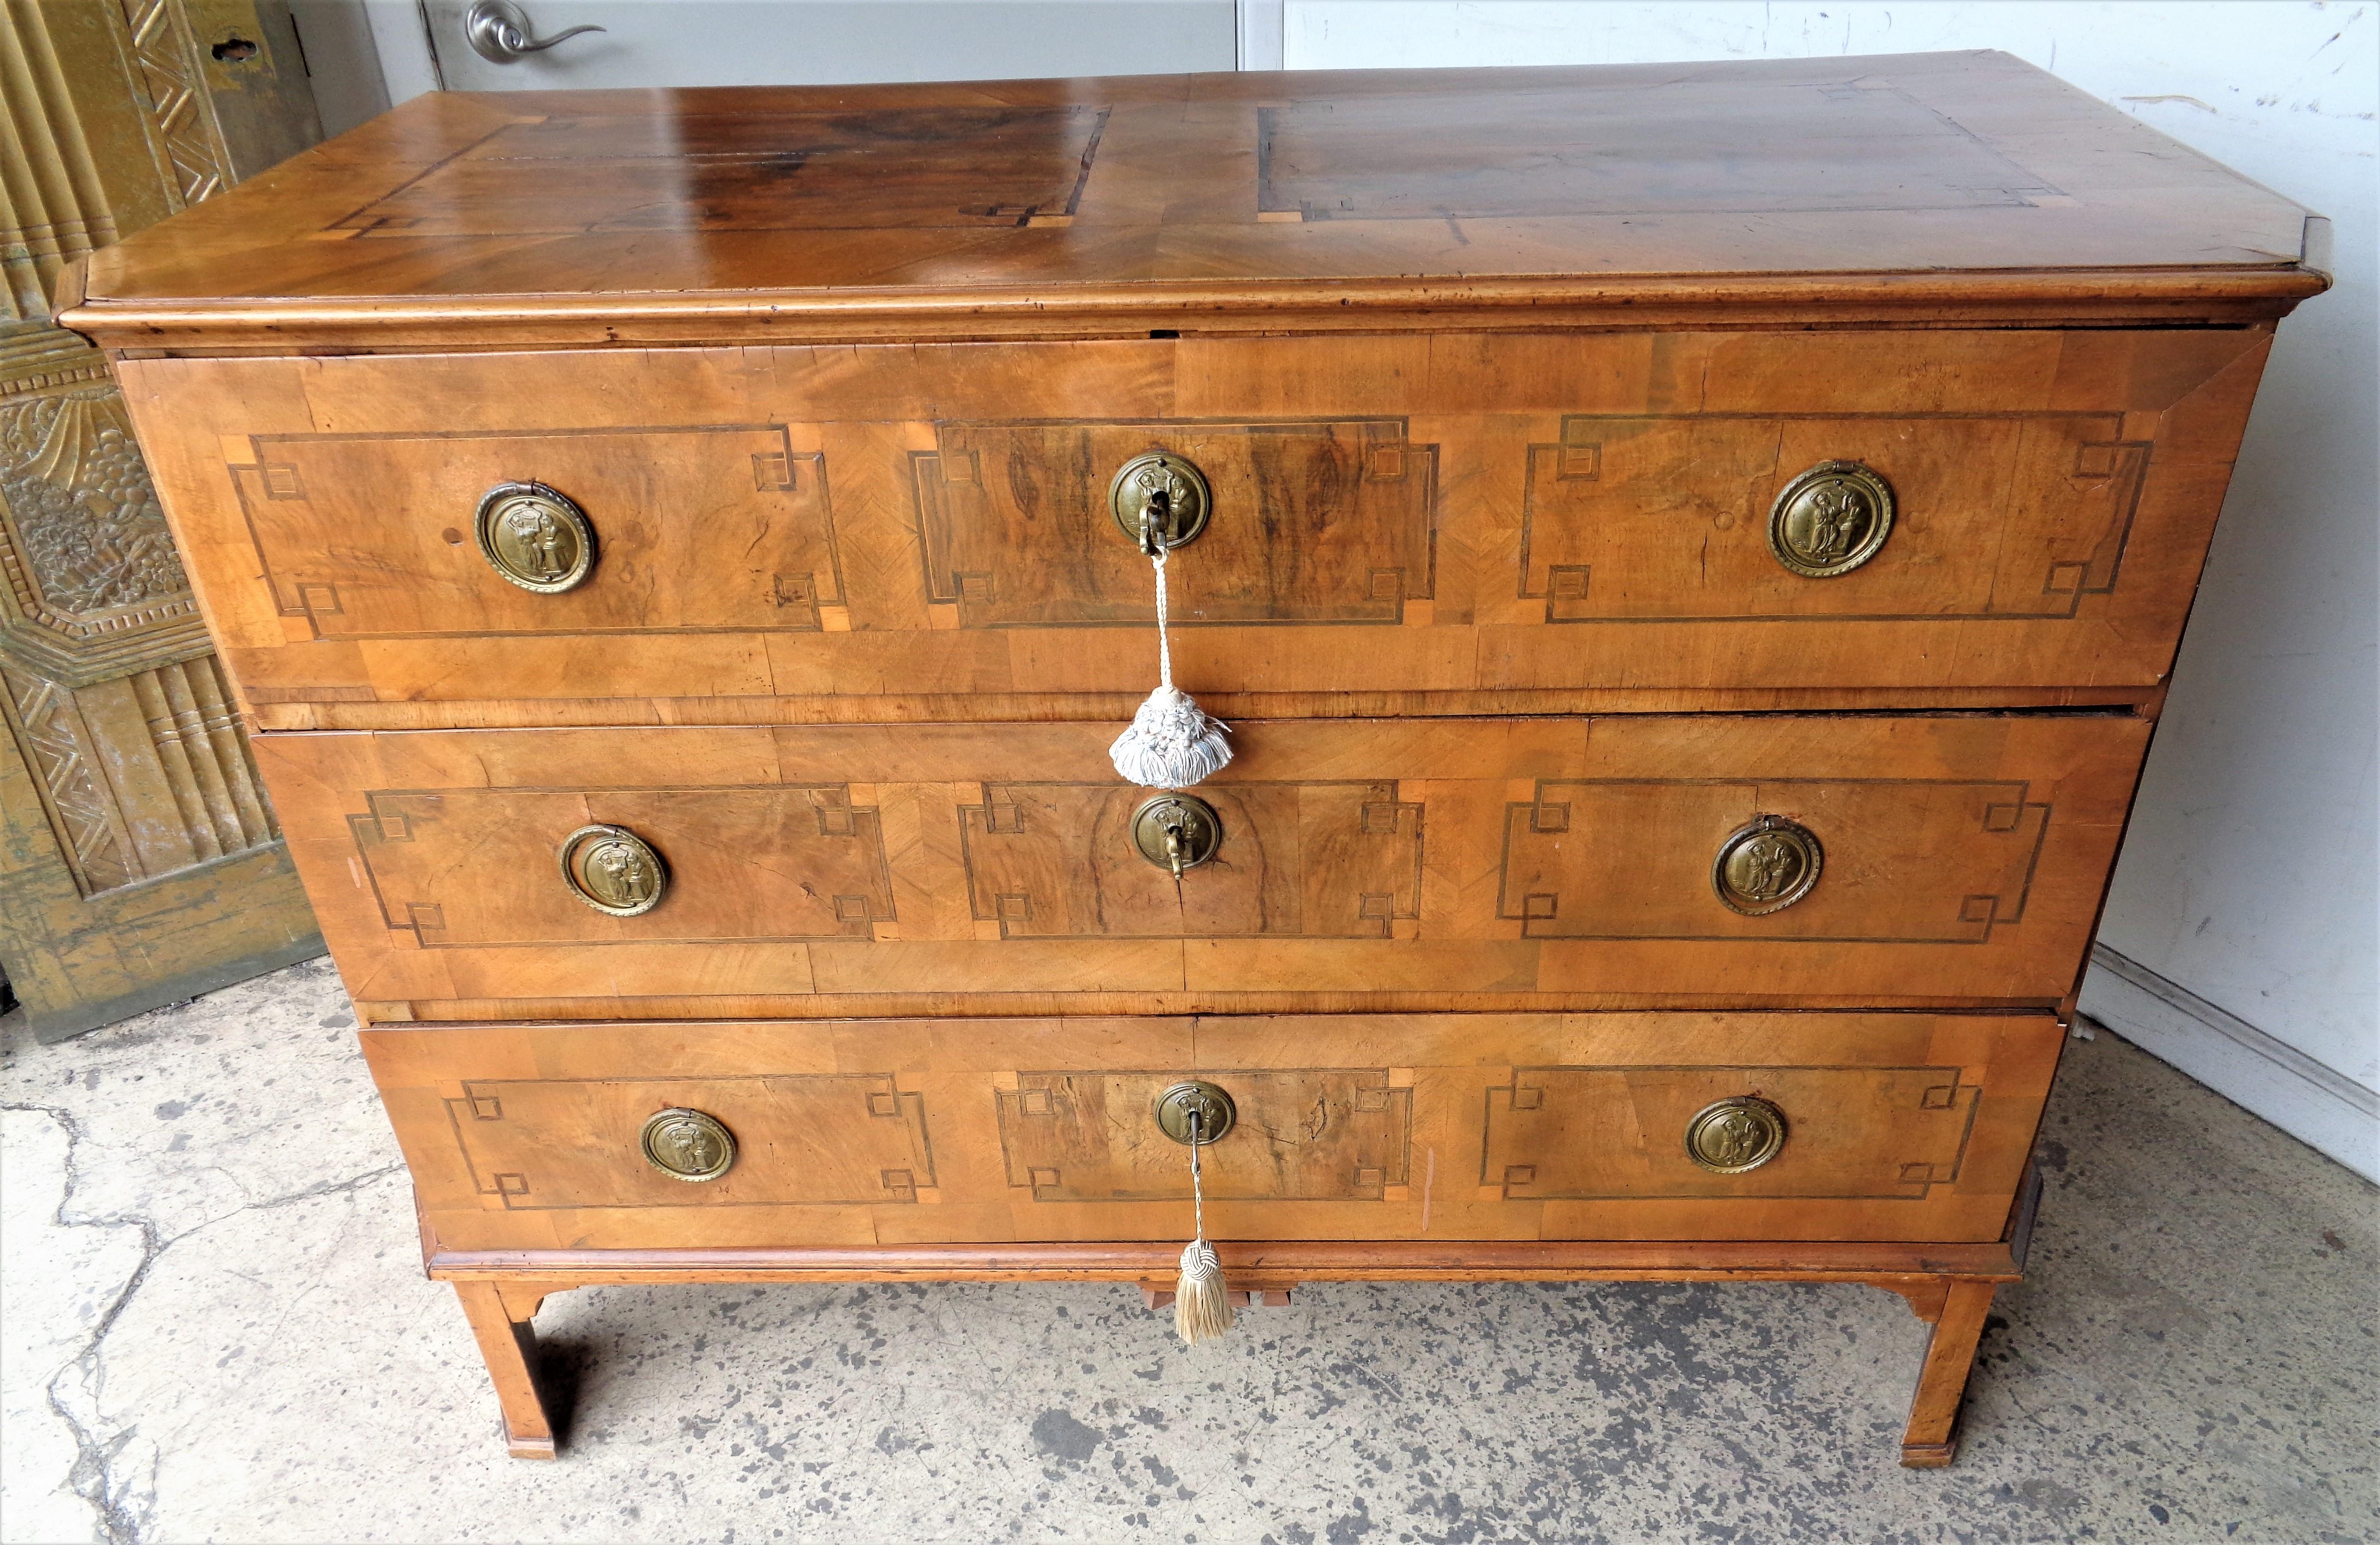 Hand-Crafted 18th Century German Neoclassical Inlaid Chest of Drawers